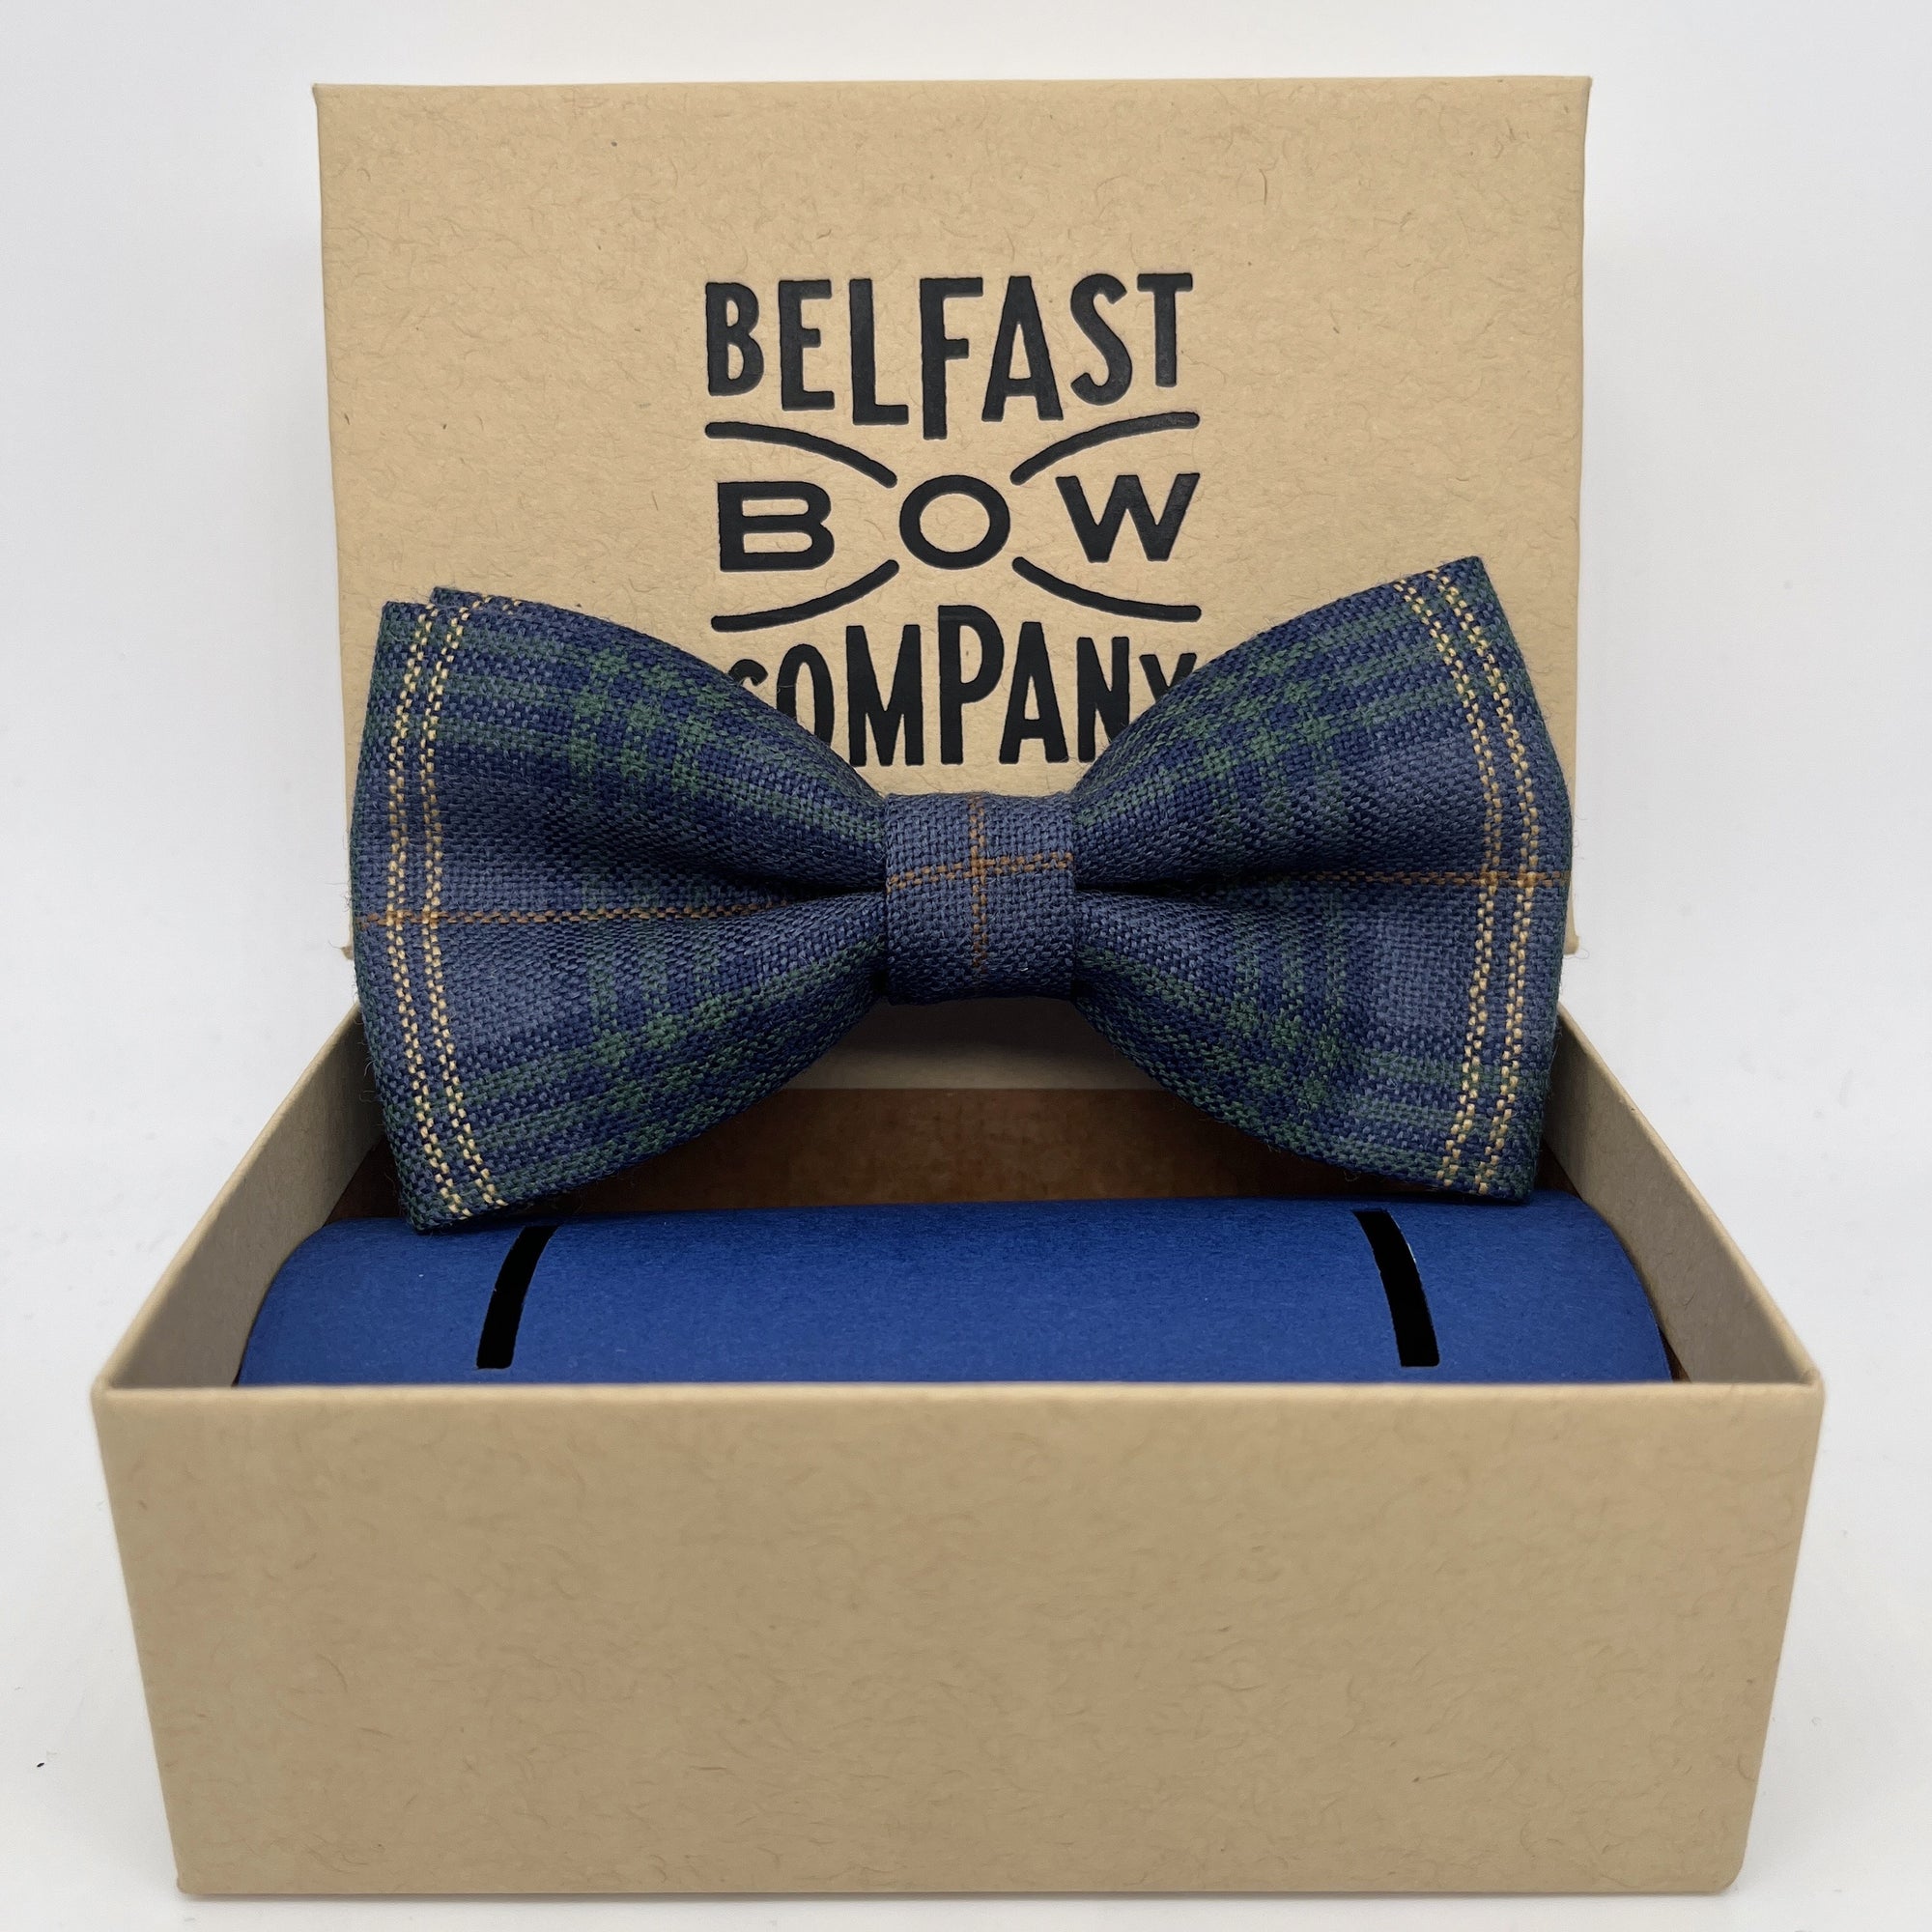 County Fermanagh Tartan Dickie Bow Tie by the Belfast Bow Company